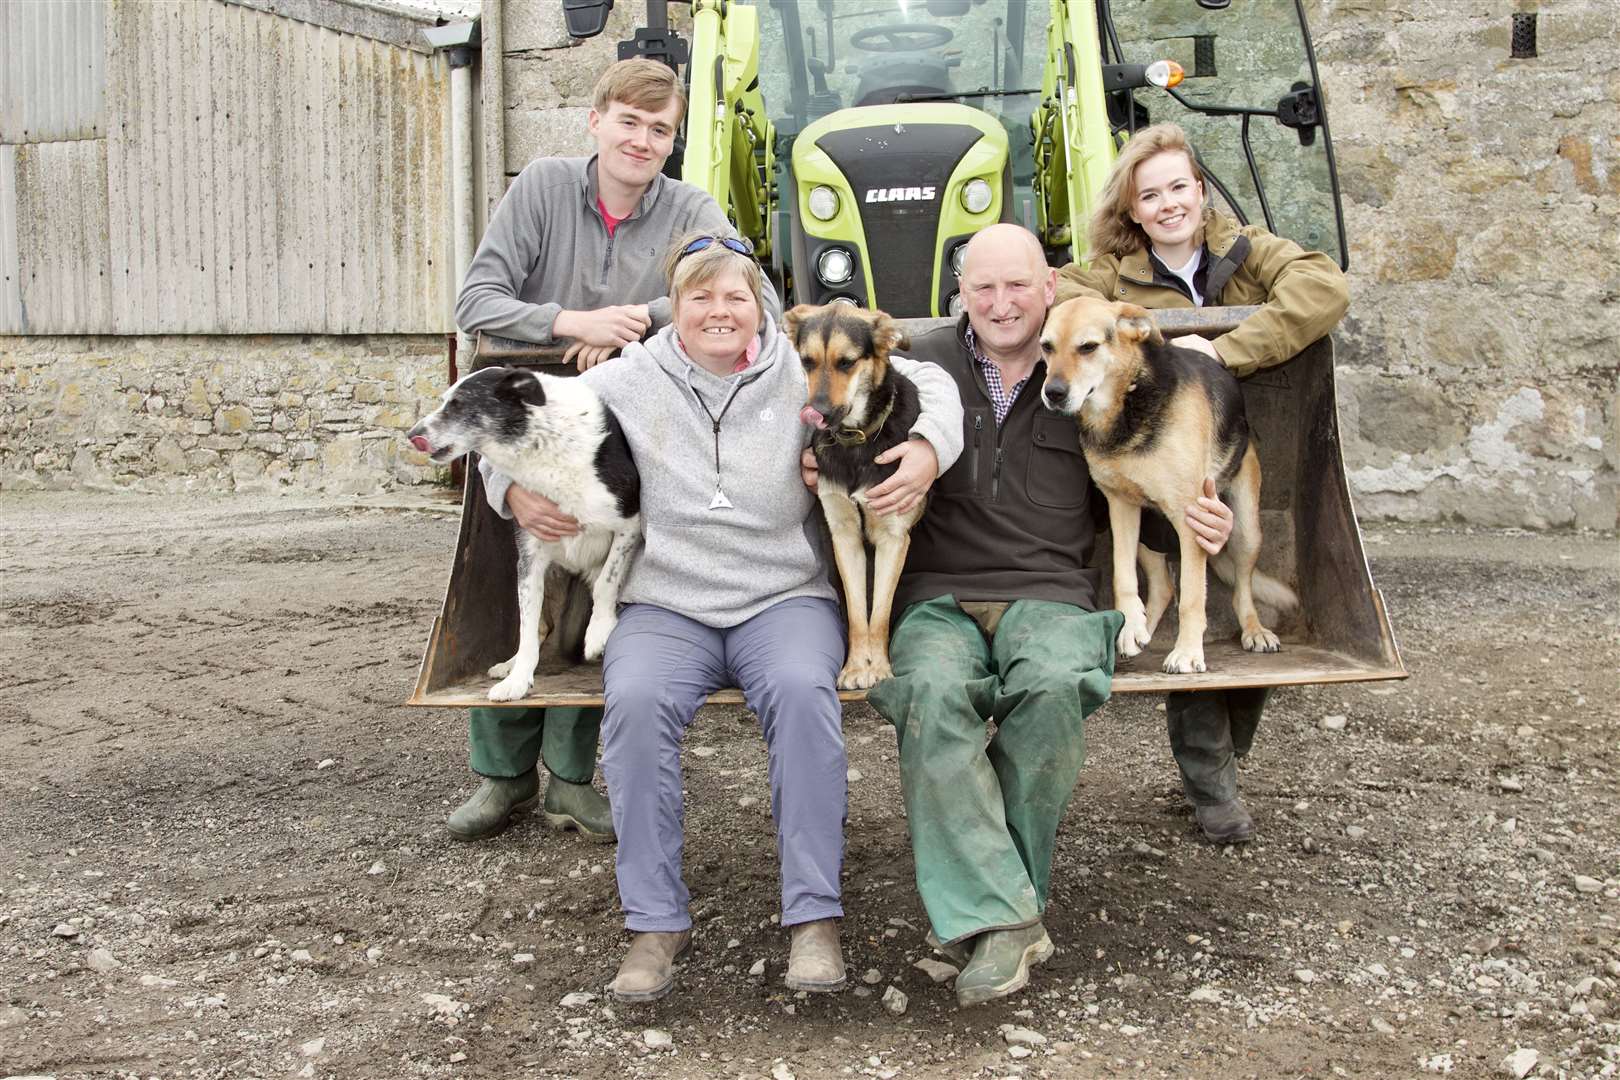 The team at Armadale Farm take some time out for a quick photo opportunity. In the tractor bucket are Joyce Campbell and her husband Ian Macleay, with twins Mure and Frances Grant standing behind. Also in the picture are farm dogs Jock, Ruby and Jude. Picture: Caroline Jones